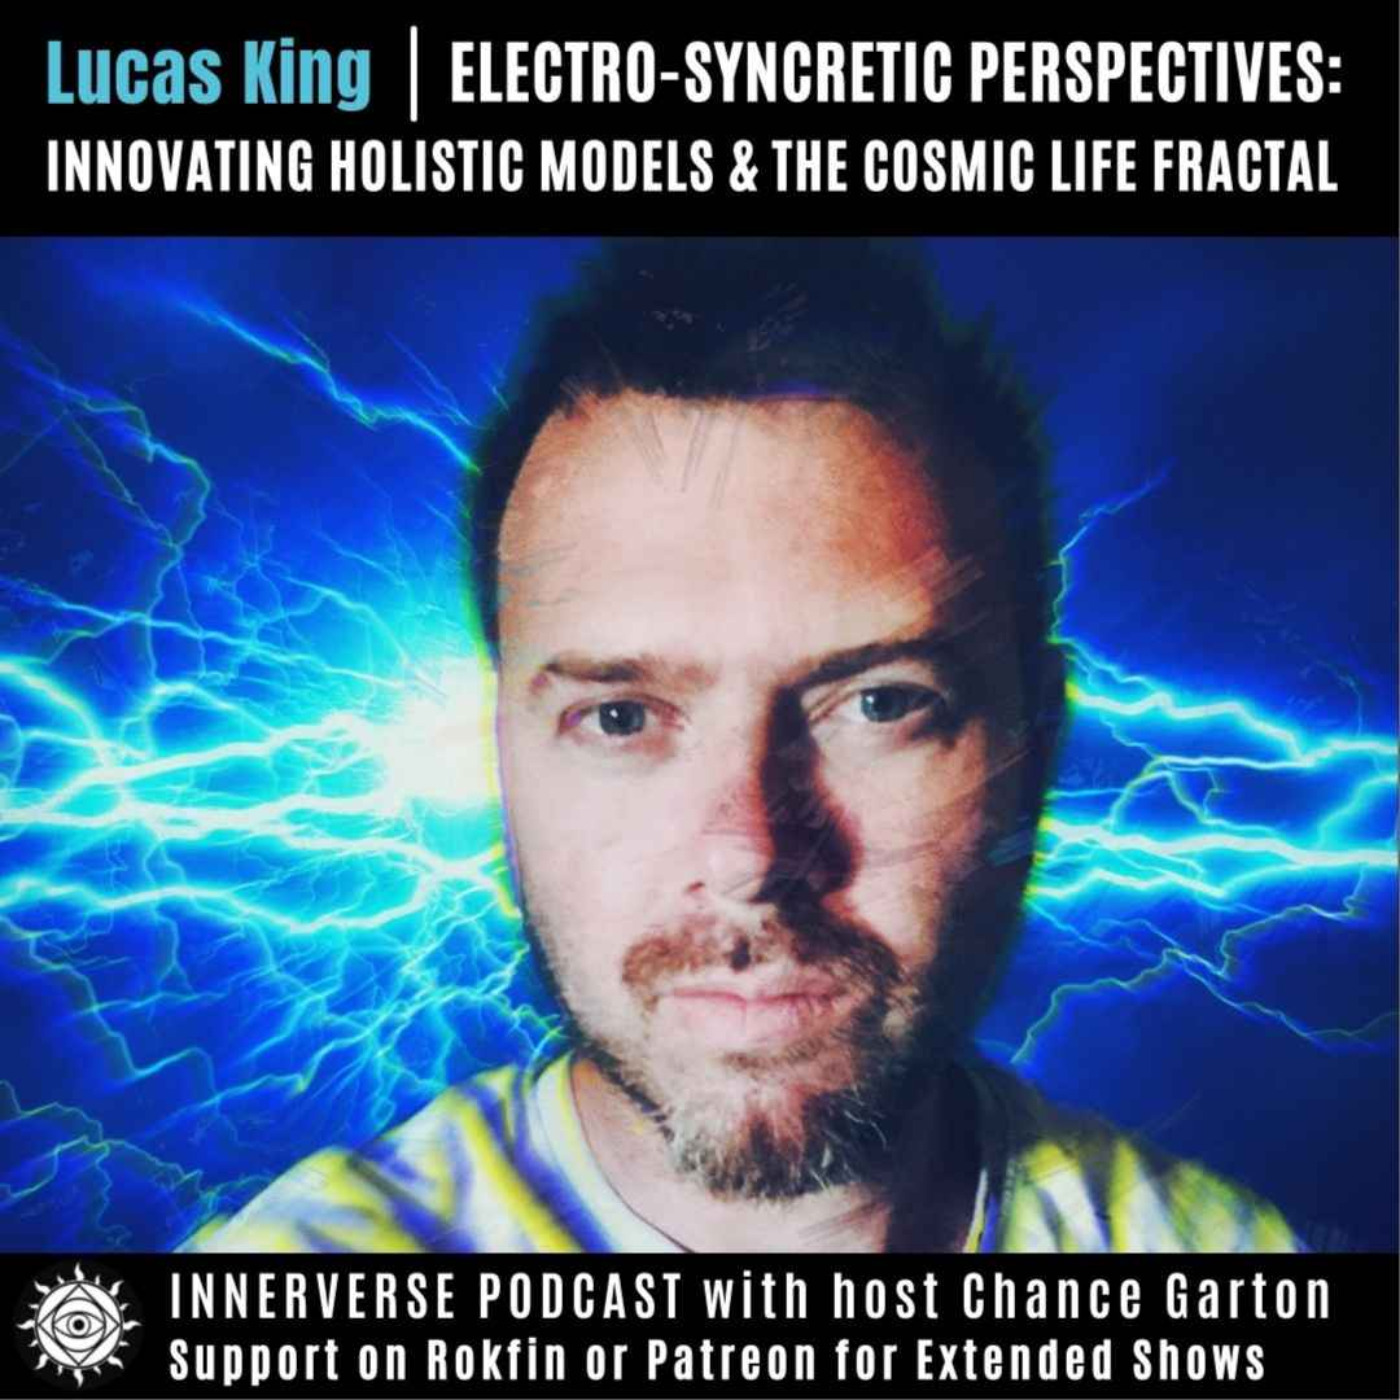 Lucas King | Electro-Syncretic Perspectives: Innovating Holistic Models & The Cosmic Life Fractal